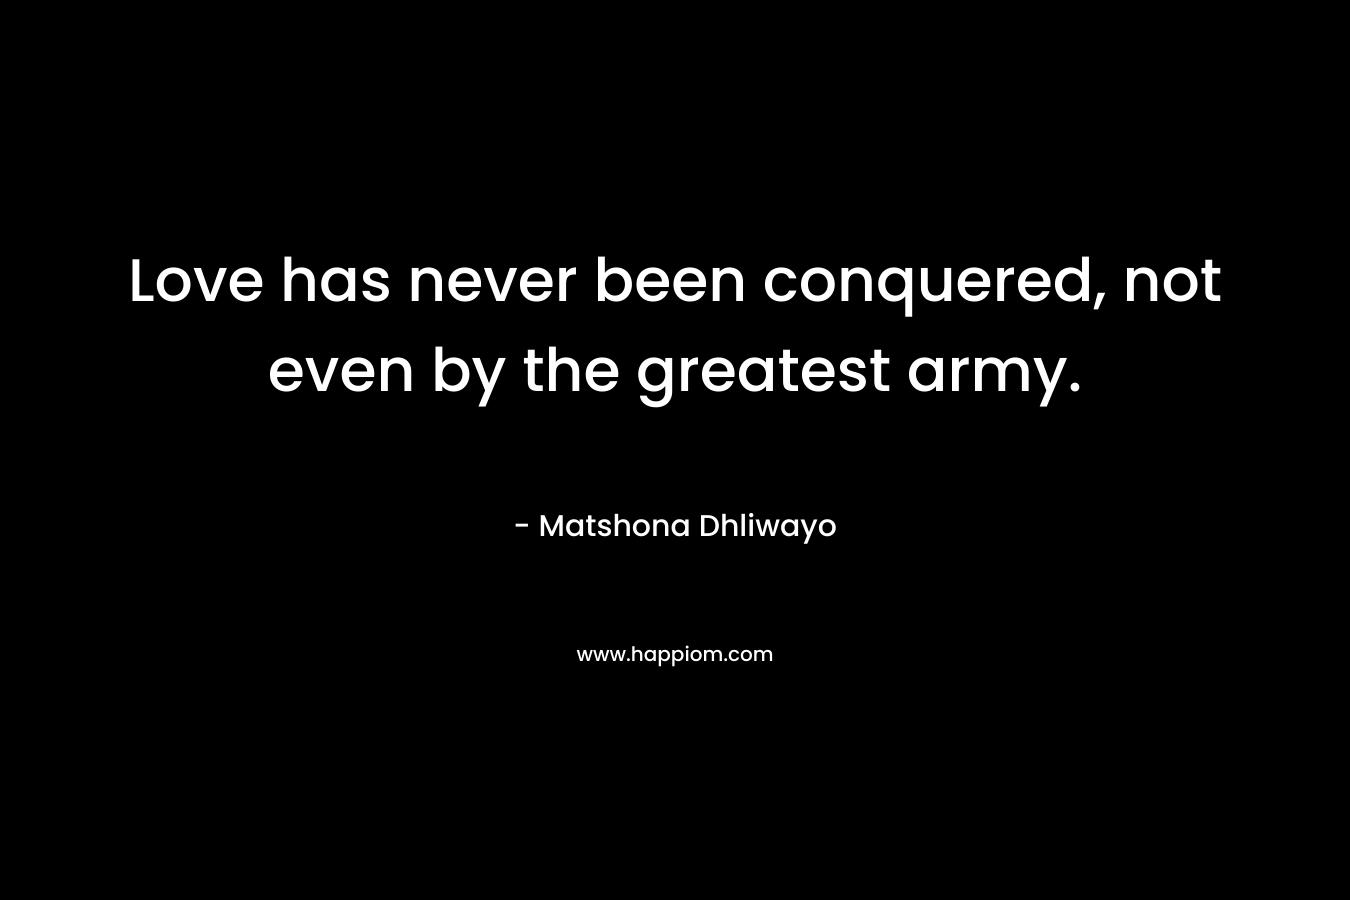 Love has never been conquered, not even by the greatest army.